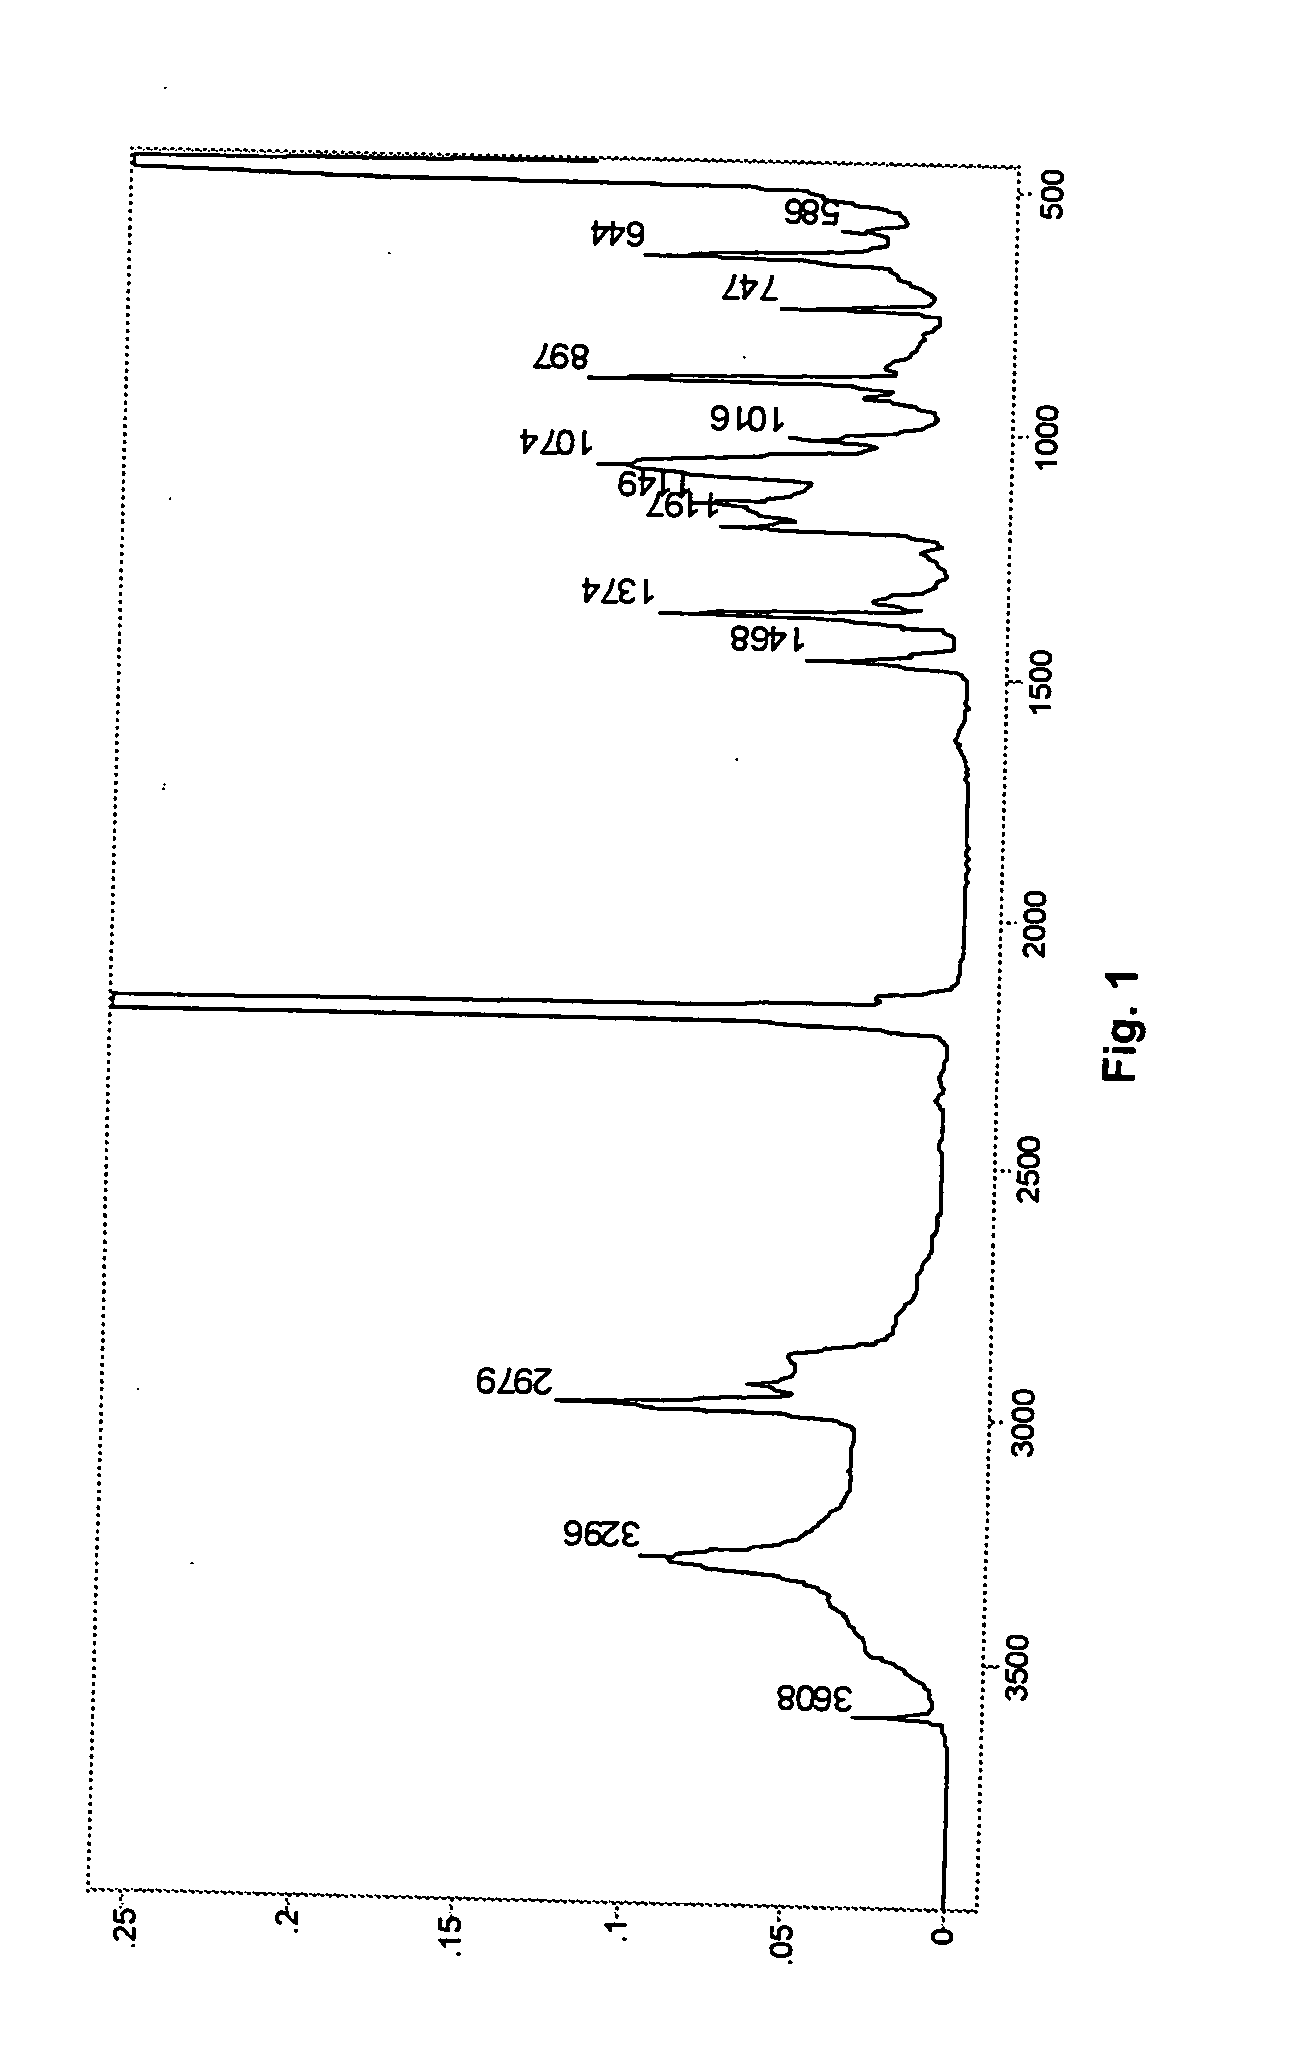 Process for the production of polyols using DMC catalysts having unsaturated tertiary alcohols as ligands